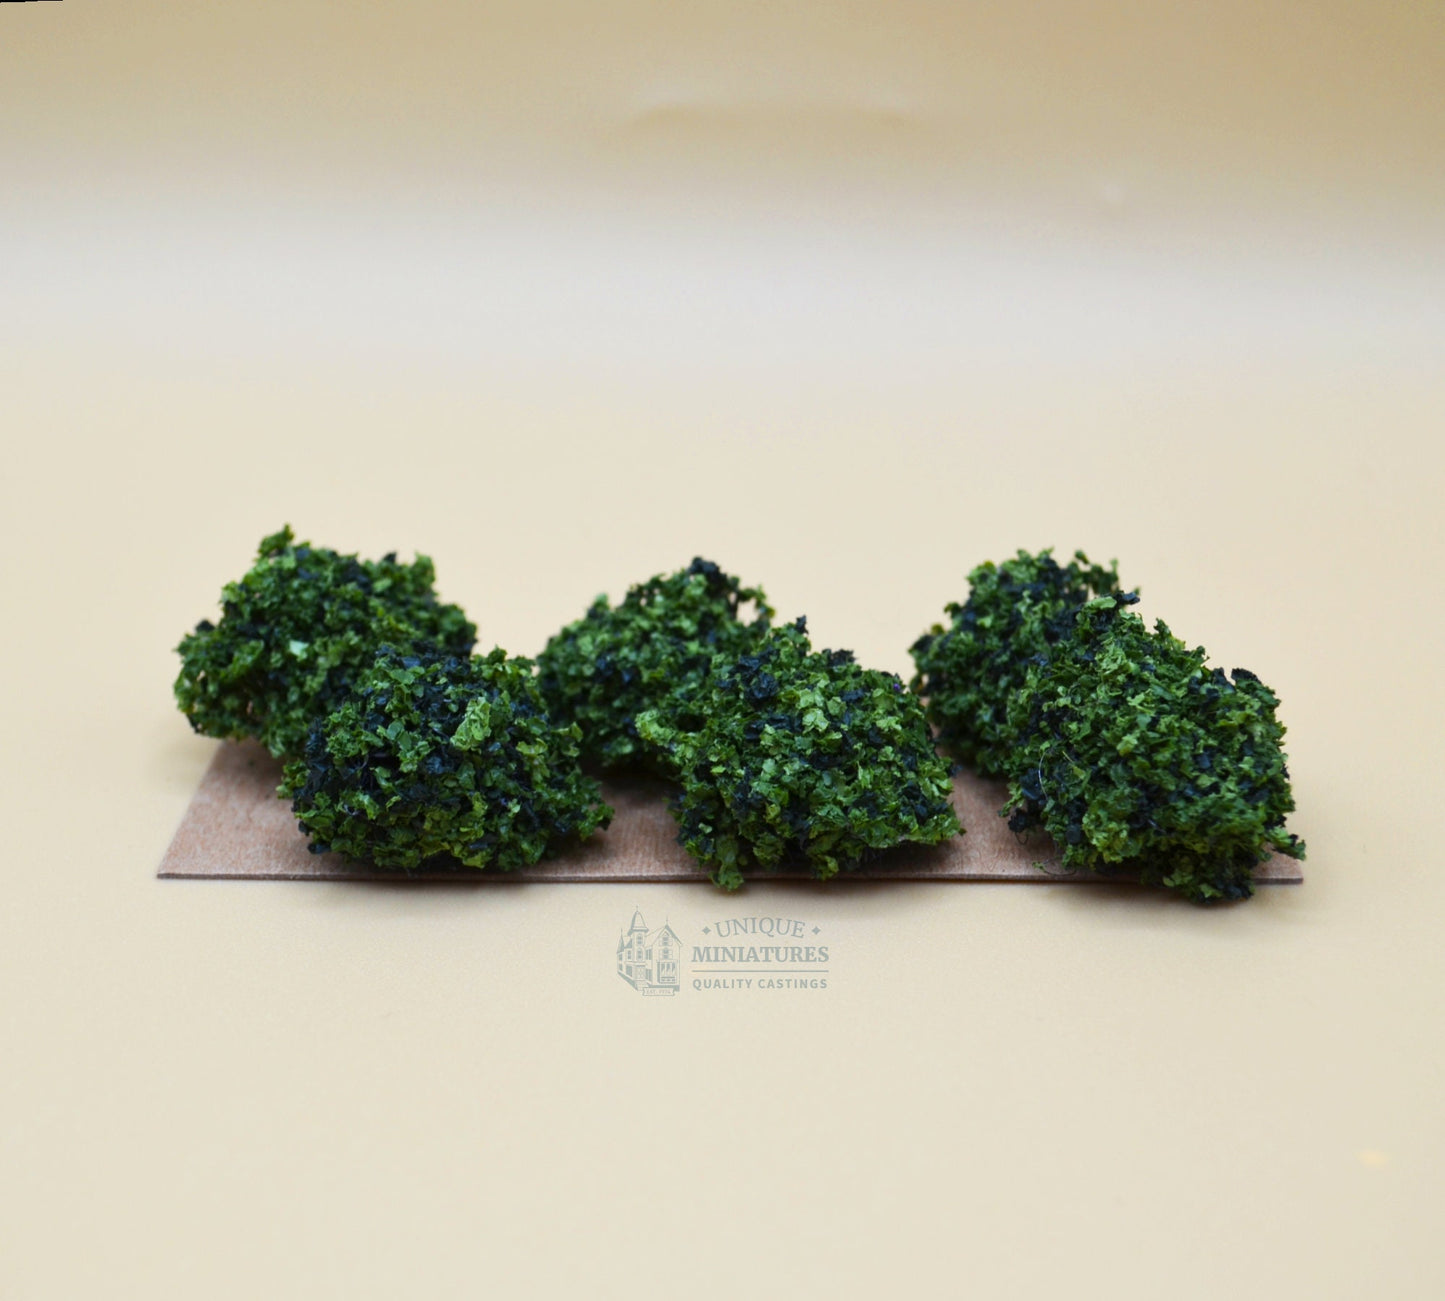 Tiny Trimmed Green Circular Hedges | 1 Inch | Set of 6 | Miniature for Dollhouse Garden